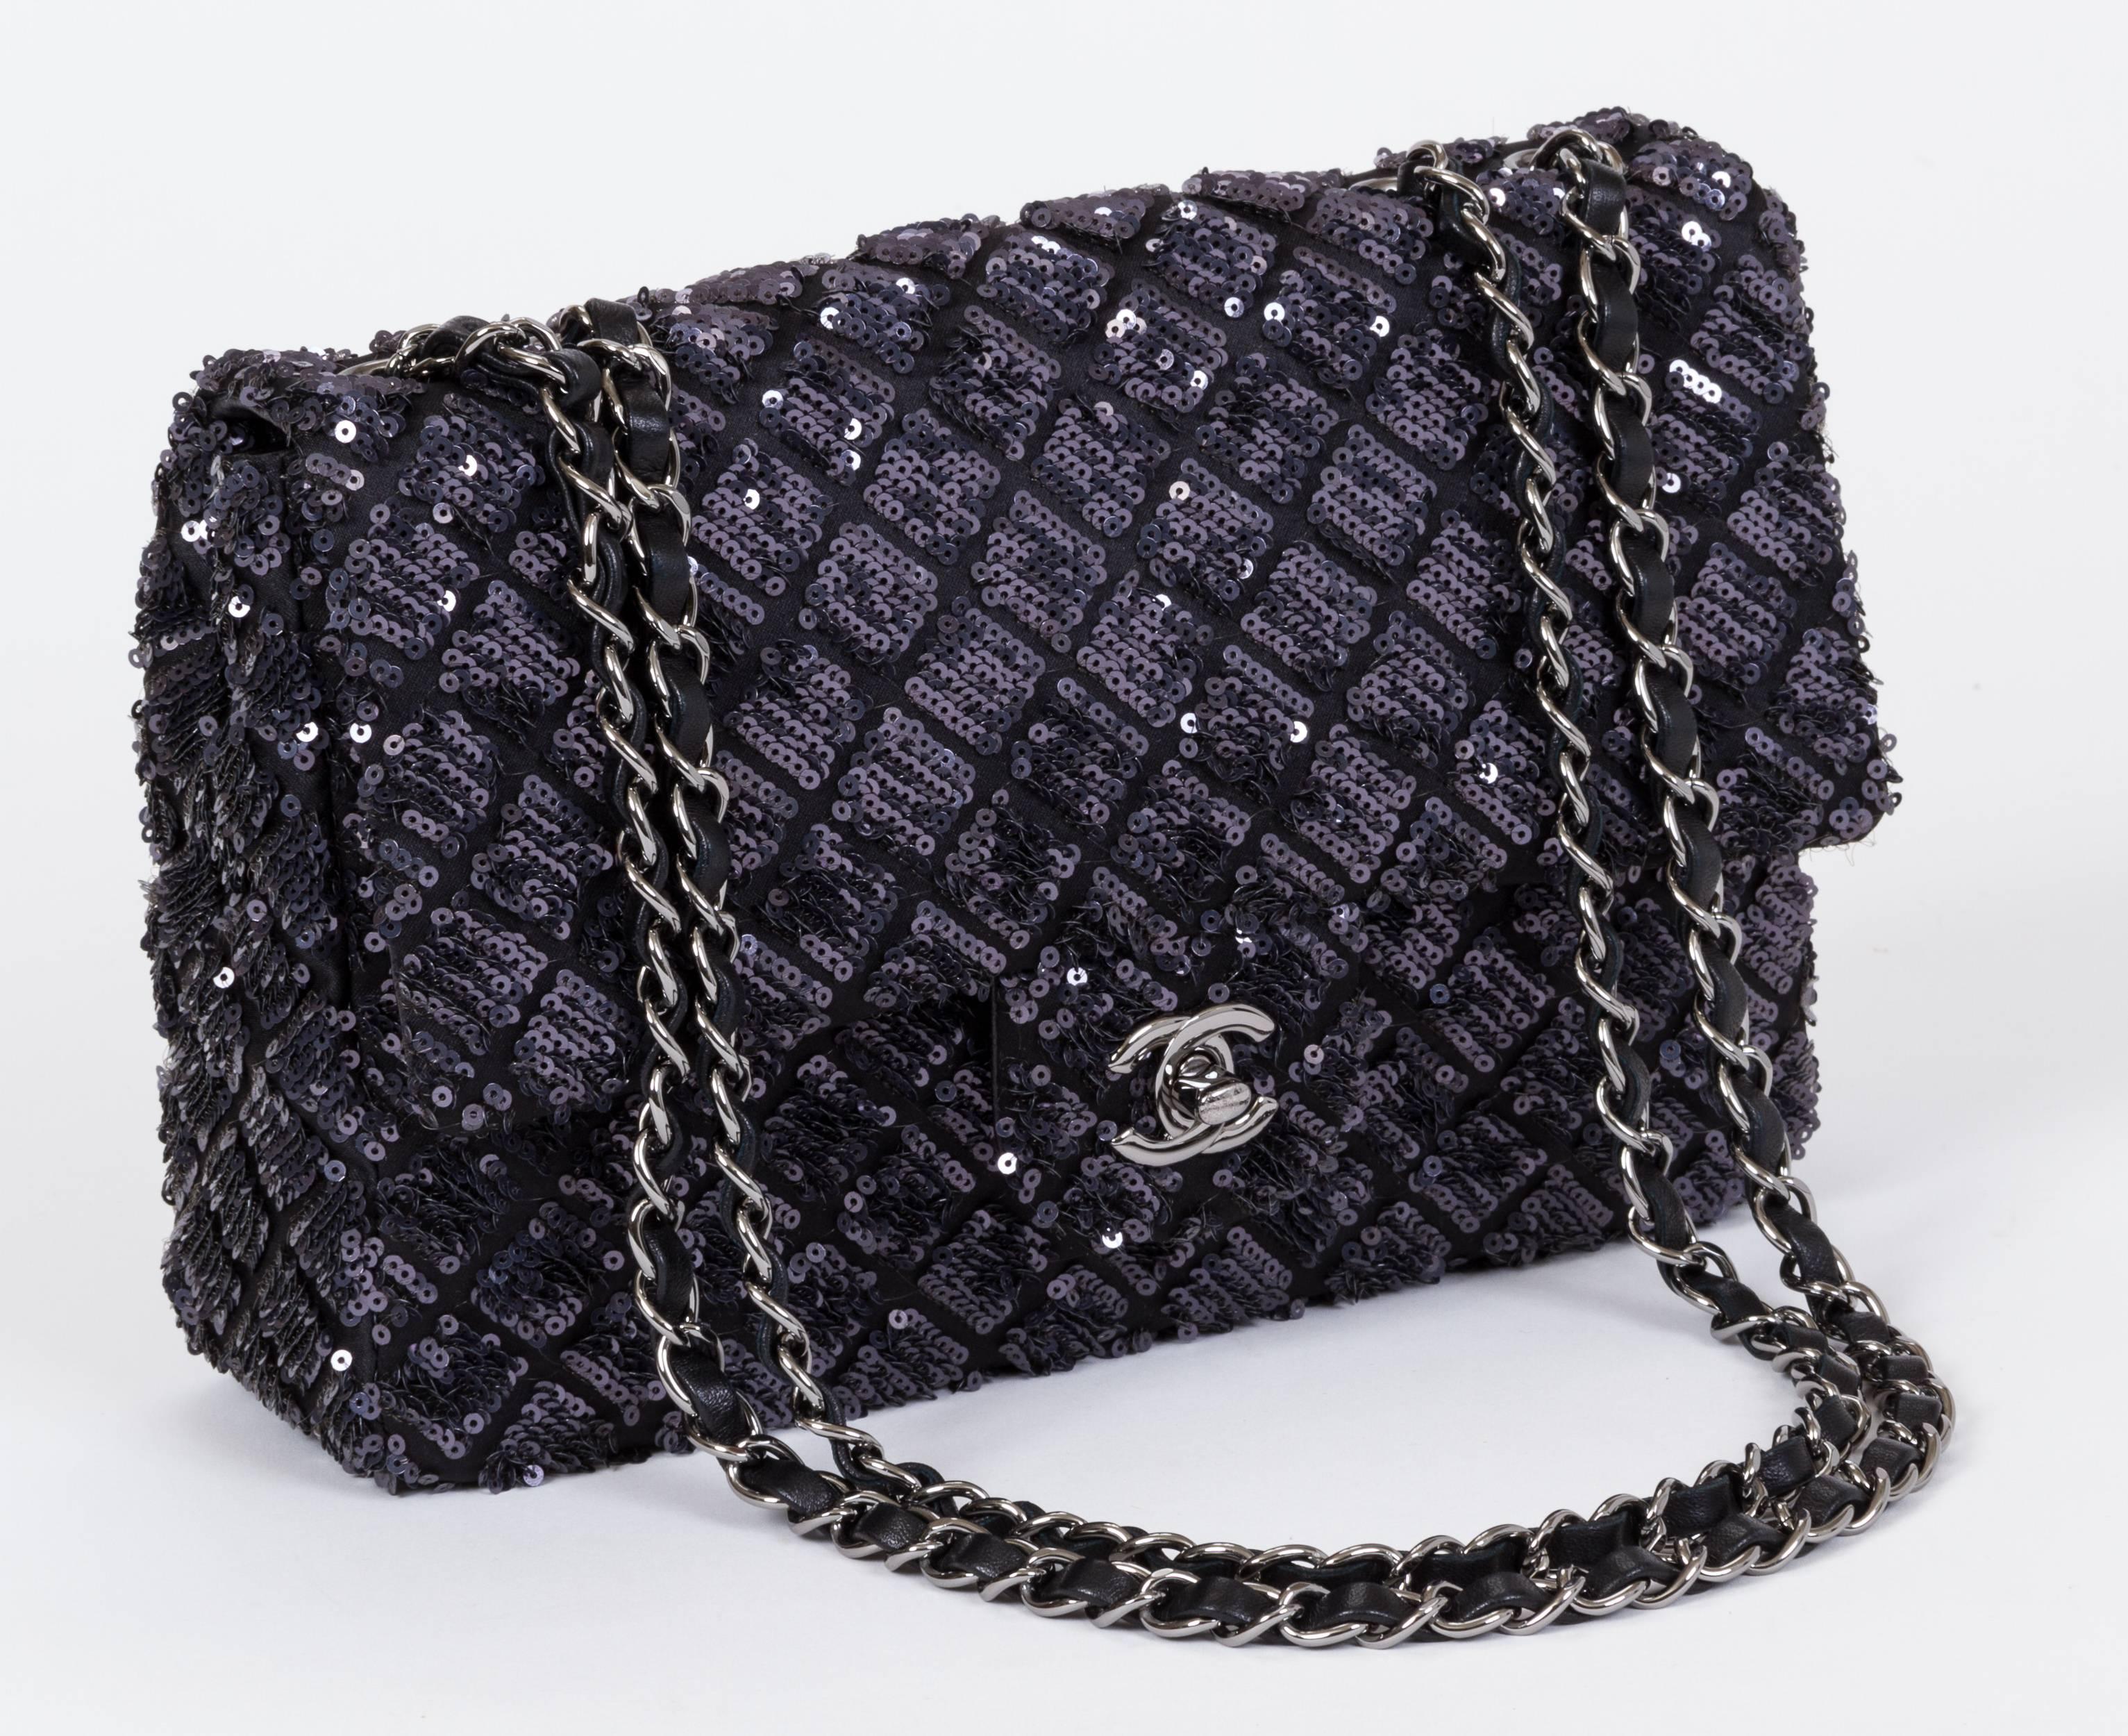 Chanel grey and black sequins medium flap in excellent condition. Collection 2012/2013. Shoulder drop 11.5